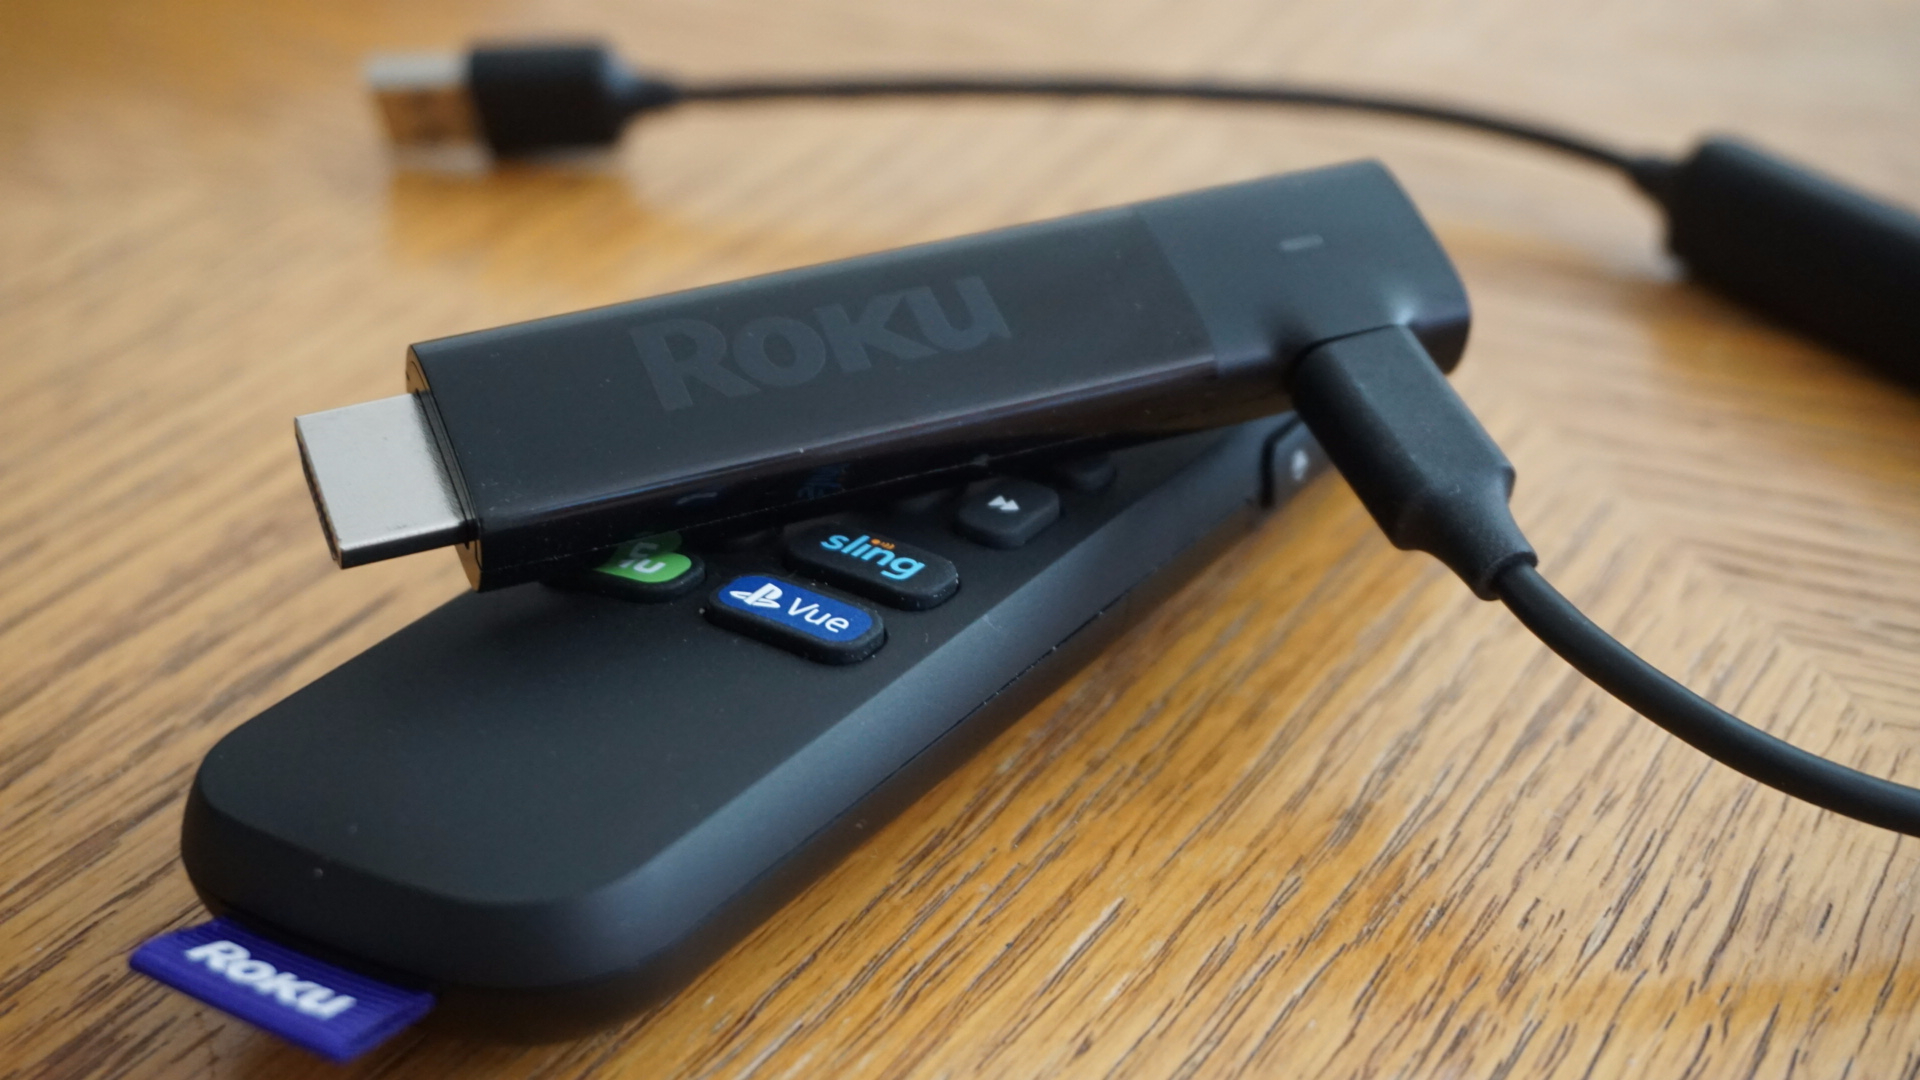 Roku Streaming Stick Plus Review: The Ultimate 4K Streaming Stick